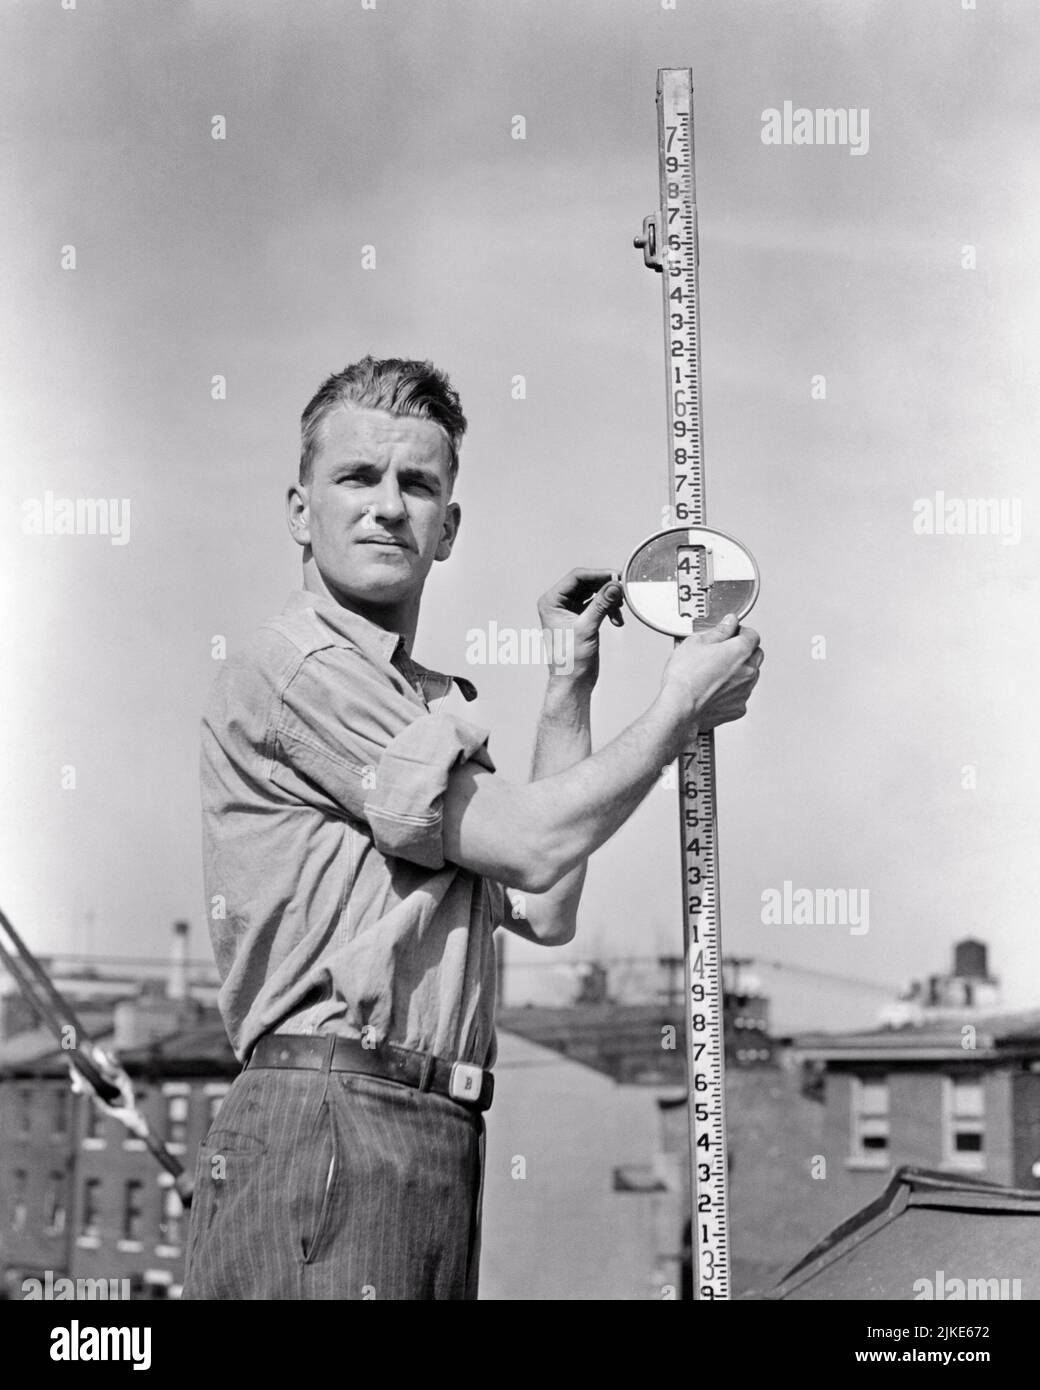 1940s MAN ASSISTING SURVEYORS ON CONSTRUCTION SITE BY HOLDING A LEVEL STAFF FOR MEASUREMENT - i41 HAR001 HARS HEAD AND SHOULDERS BUILD BASE CAREERS RECOVERY LABOR BETTER EMPLOYMENT OCCUPATIONS ERECT ERECTING INFRASTRUCTURE EMPLOYEE FACILITIES SURVEYORS ASSISTING COOPERATION CORE LEVEL MID-ADULT MID-ADULT MAN STAFF SYSTEMS BLACK AND WHITE CAUCASIAN ETHNICITY ECONOMY HAR001 LABORING OLD FASHIONED Stock Photo